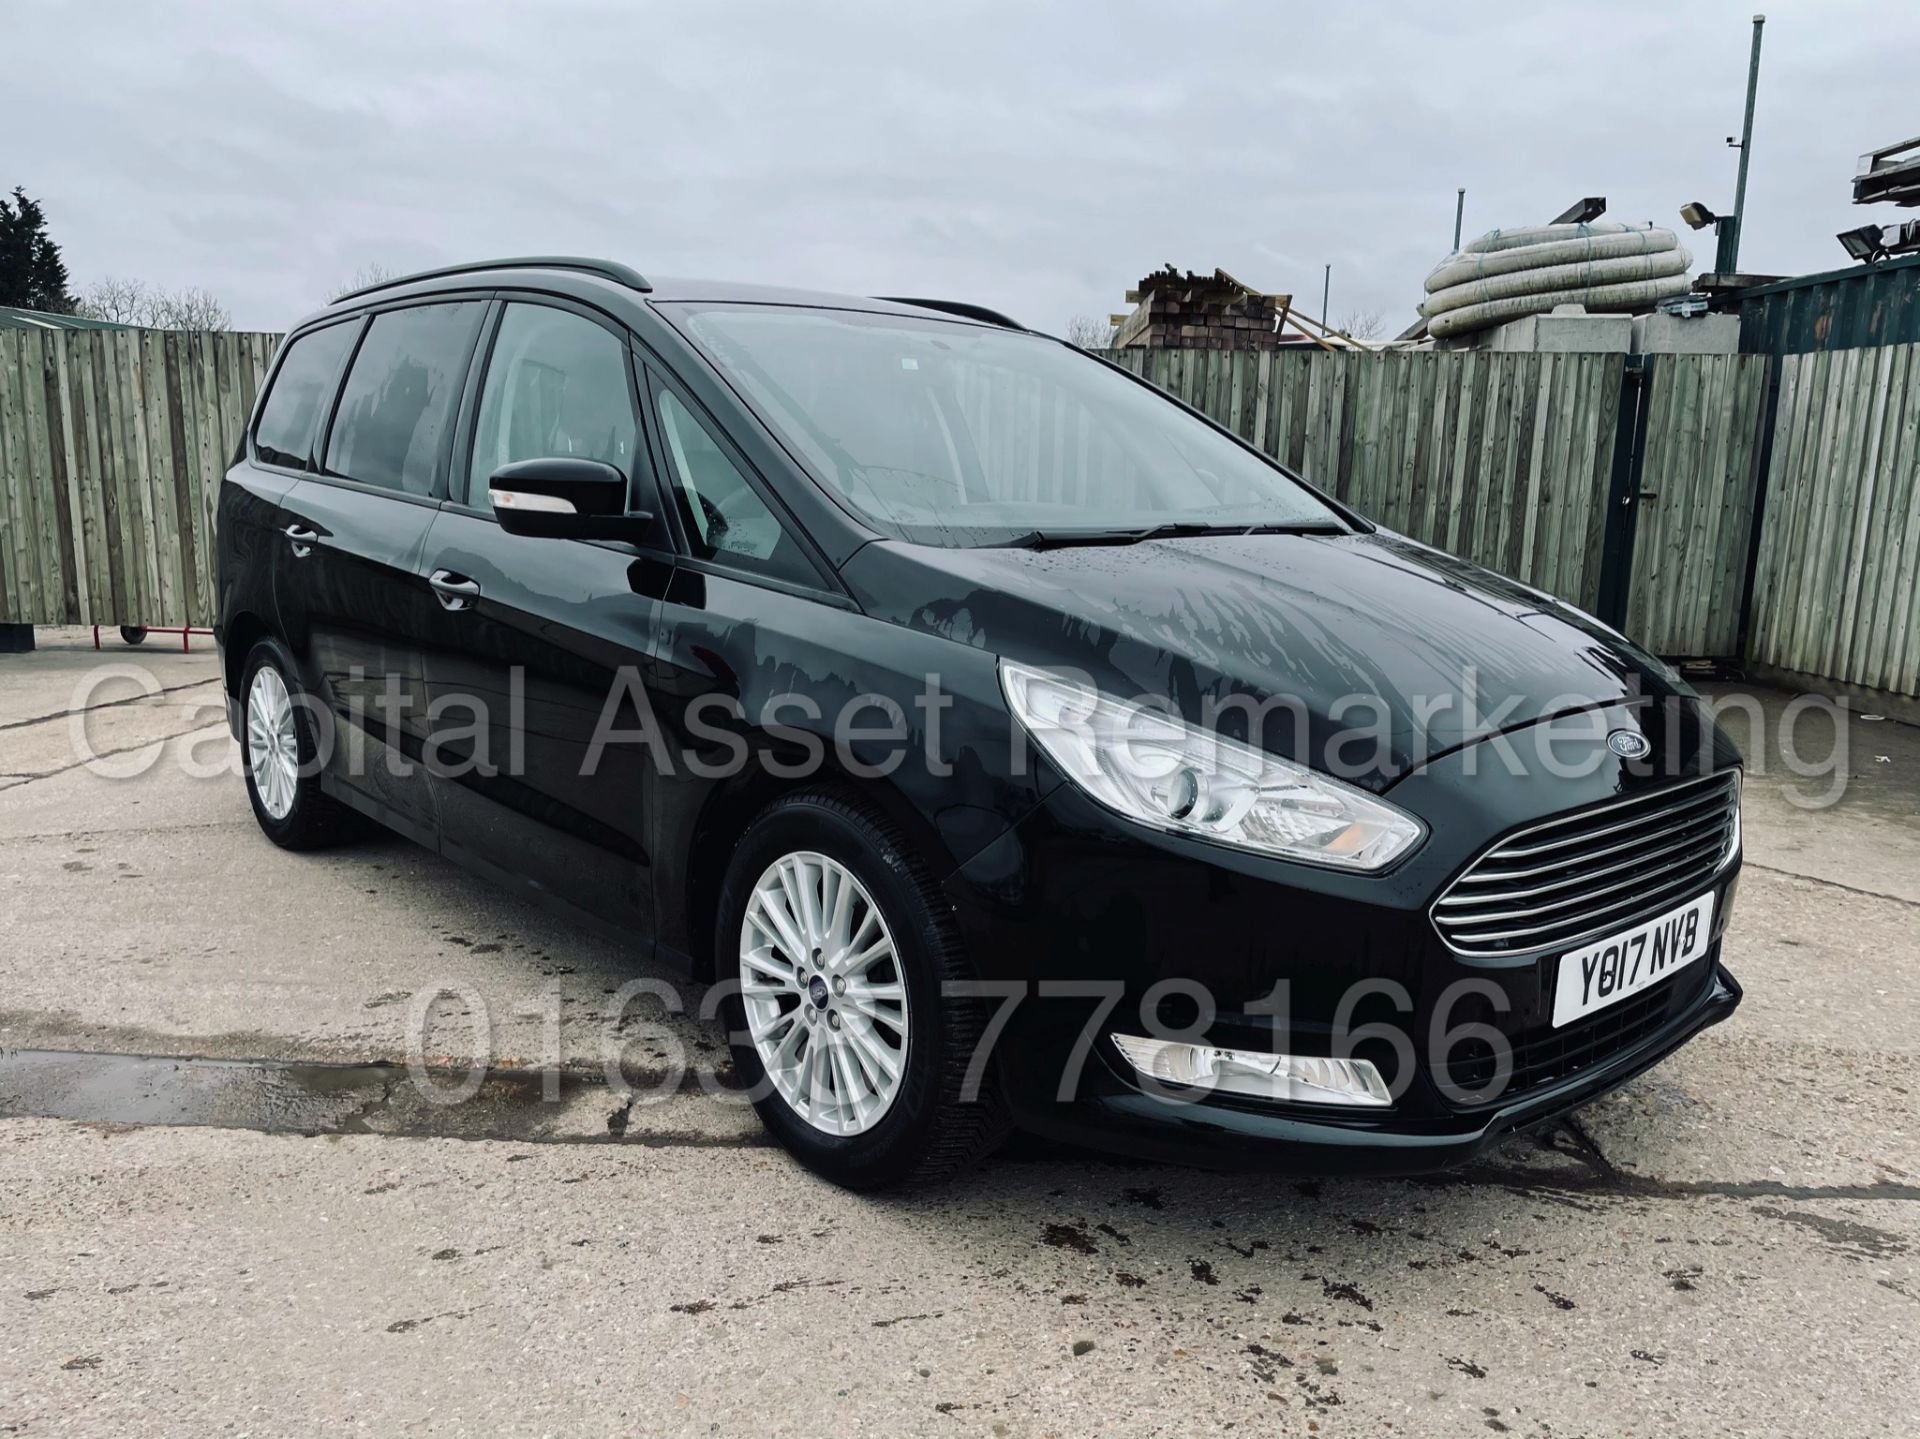 (On Sale) FORD GALAXY *ZETEC EDITION* 7 SEATER MPV (2017 - EURO 6) '2.0 TDCI - AUTO' (1 OWNER) - Image 3 of 55